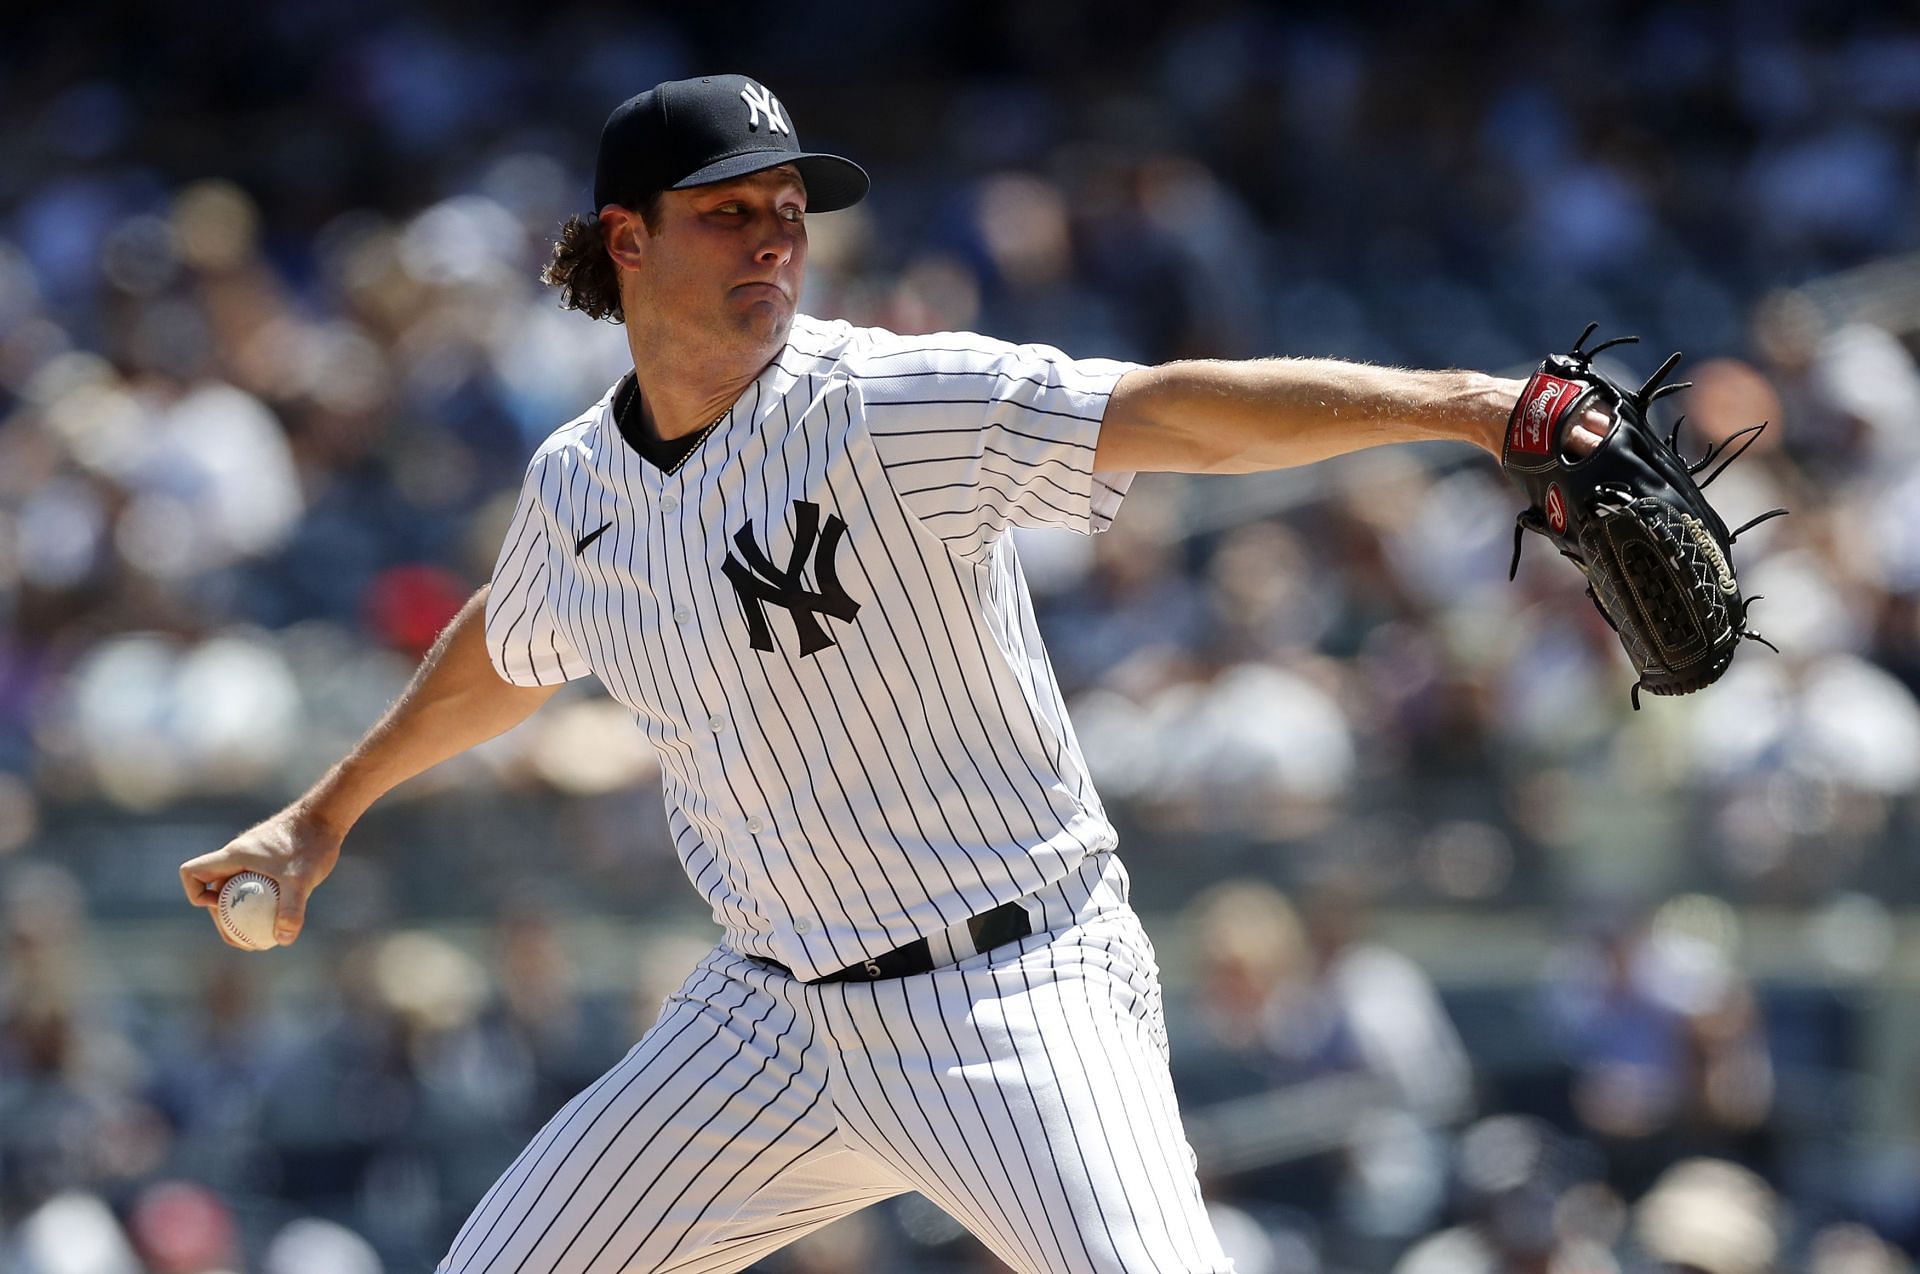 Gerrit Cole #45 of the New York Yankees pitches during the first inning against the Seattle Mariners at Yankee Stadium on August 03, 2022